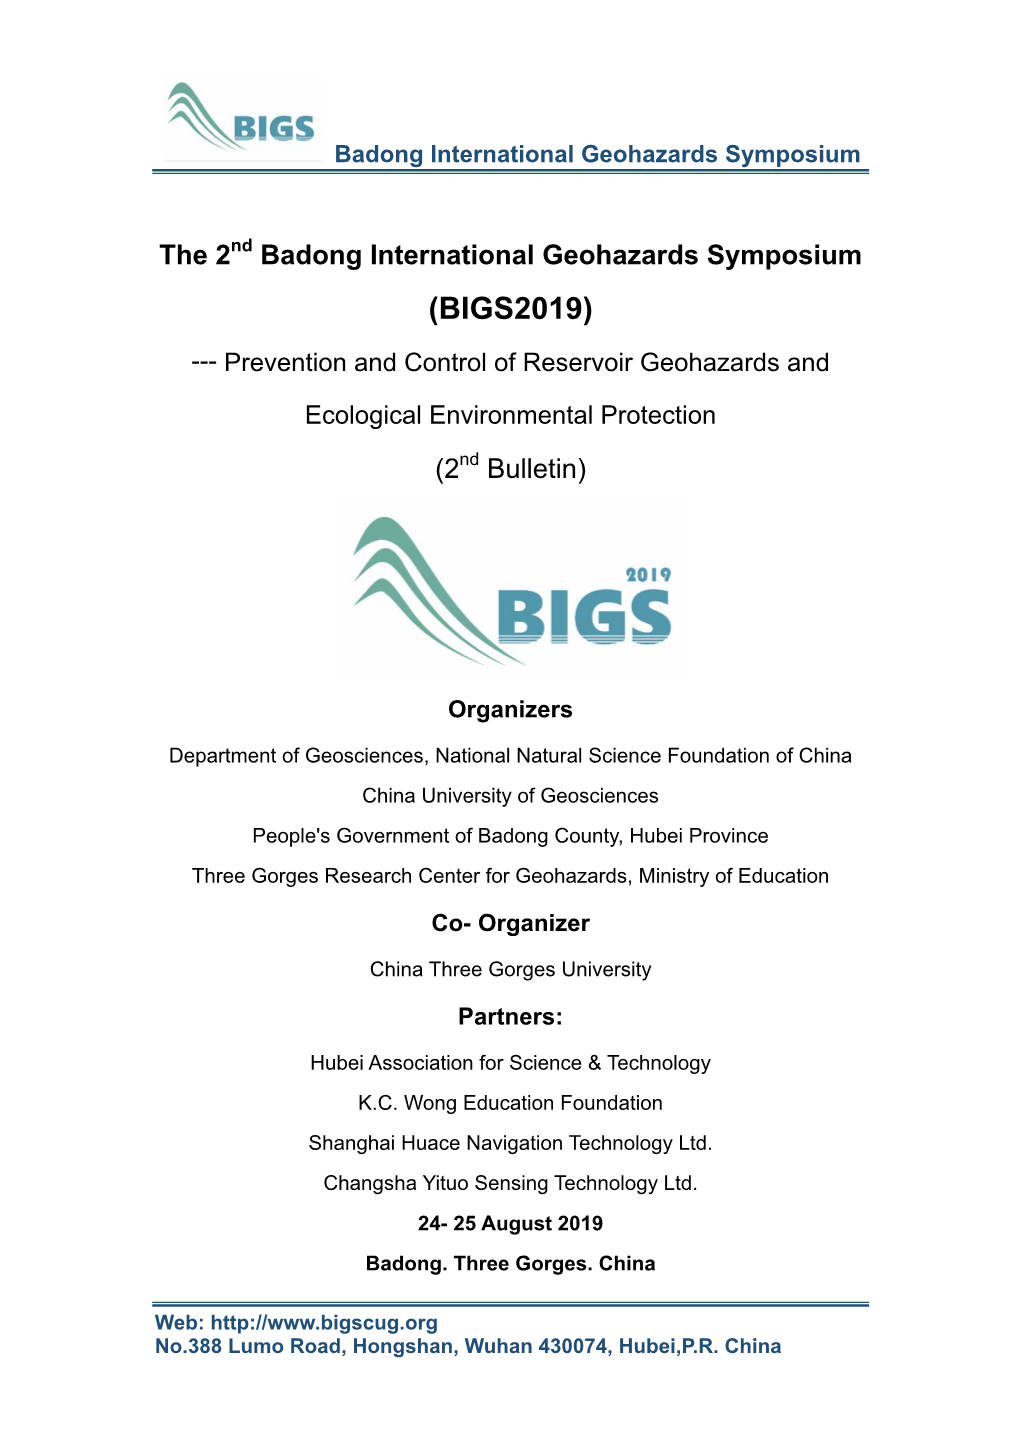 The 2Nd Badong International Geohazards Symposium (BIGS2019) --- Prevention and Control of Reservoir Geohazards And